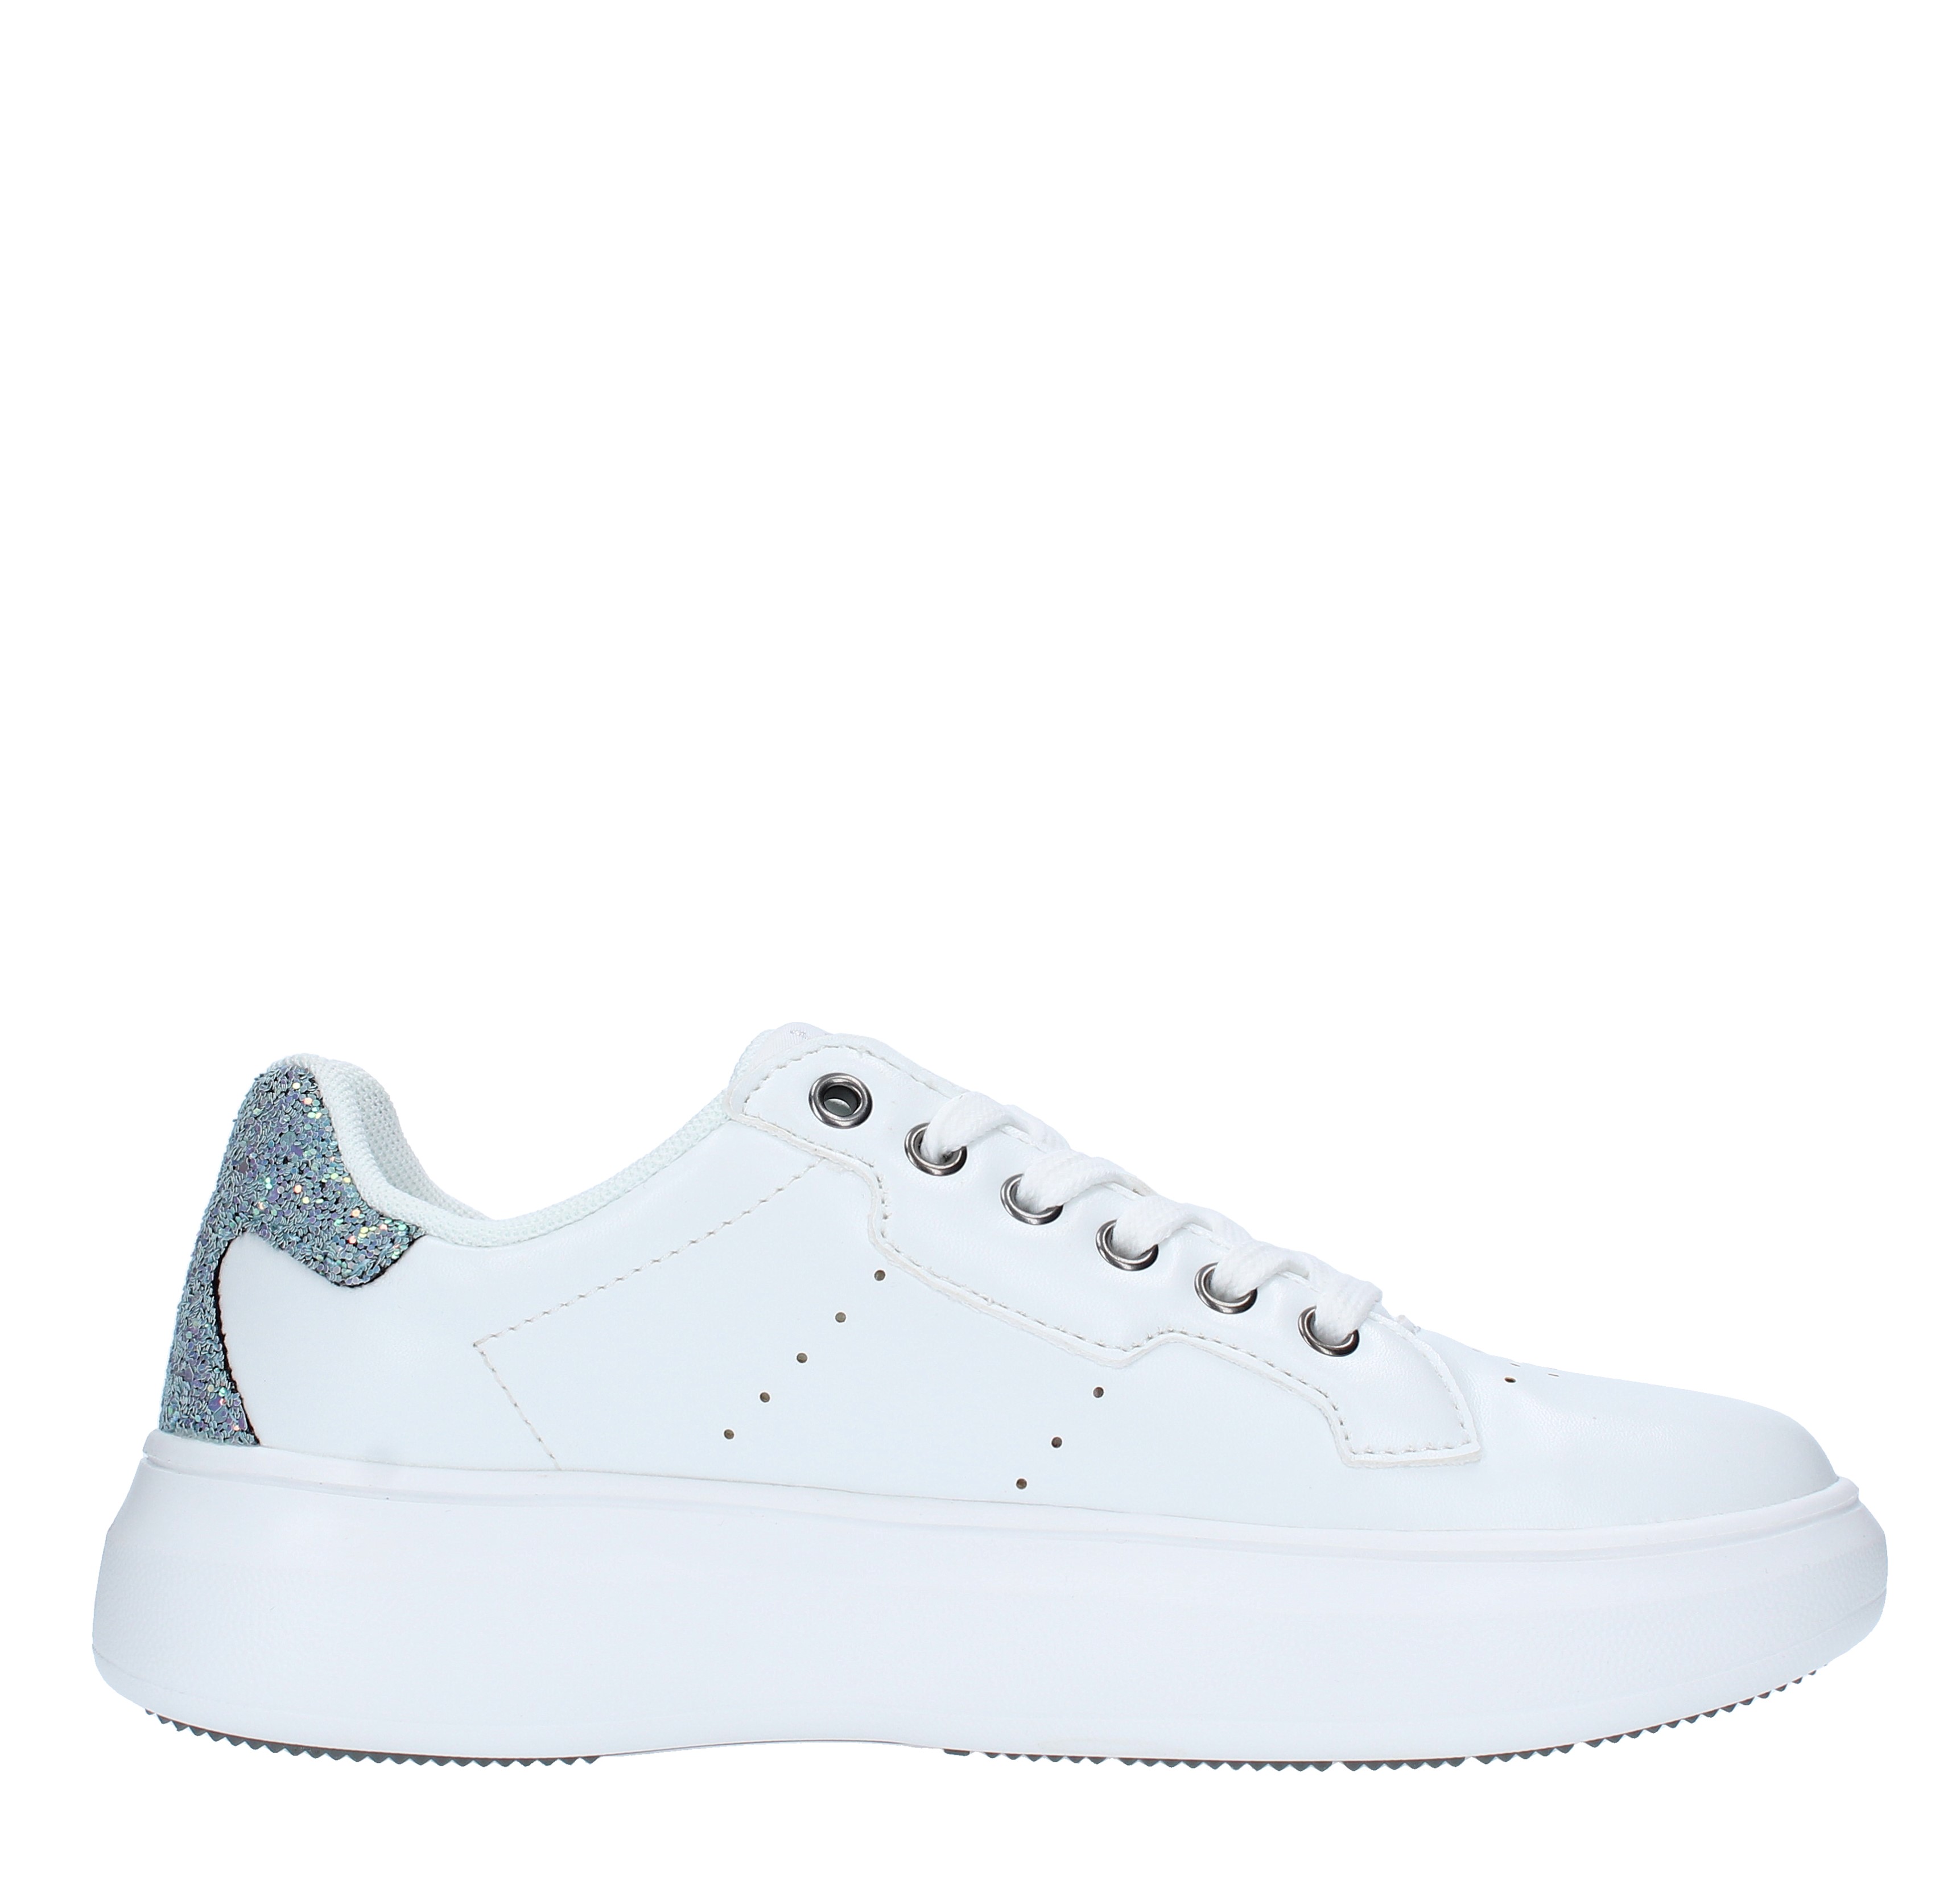 Faux leather and glitter trainers U.S. POLO ASSN. | JEWEL4029S1/Y3WHI-SIL